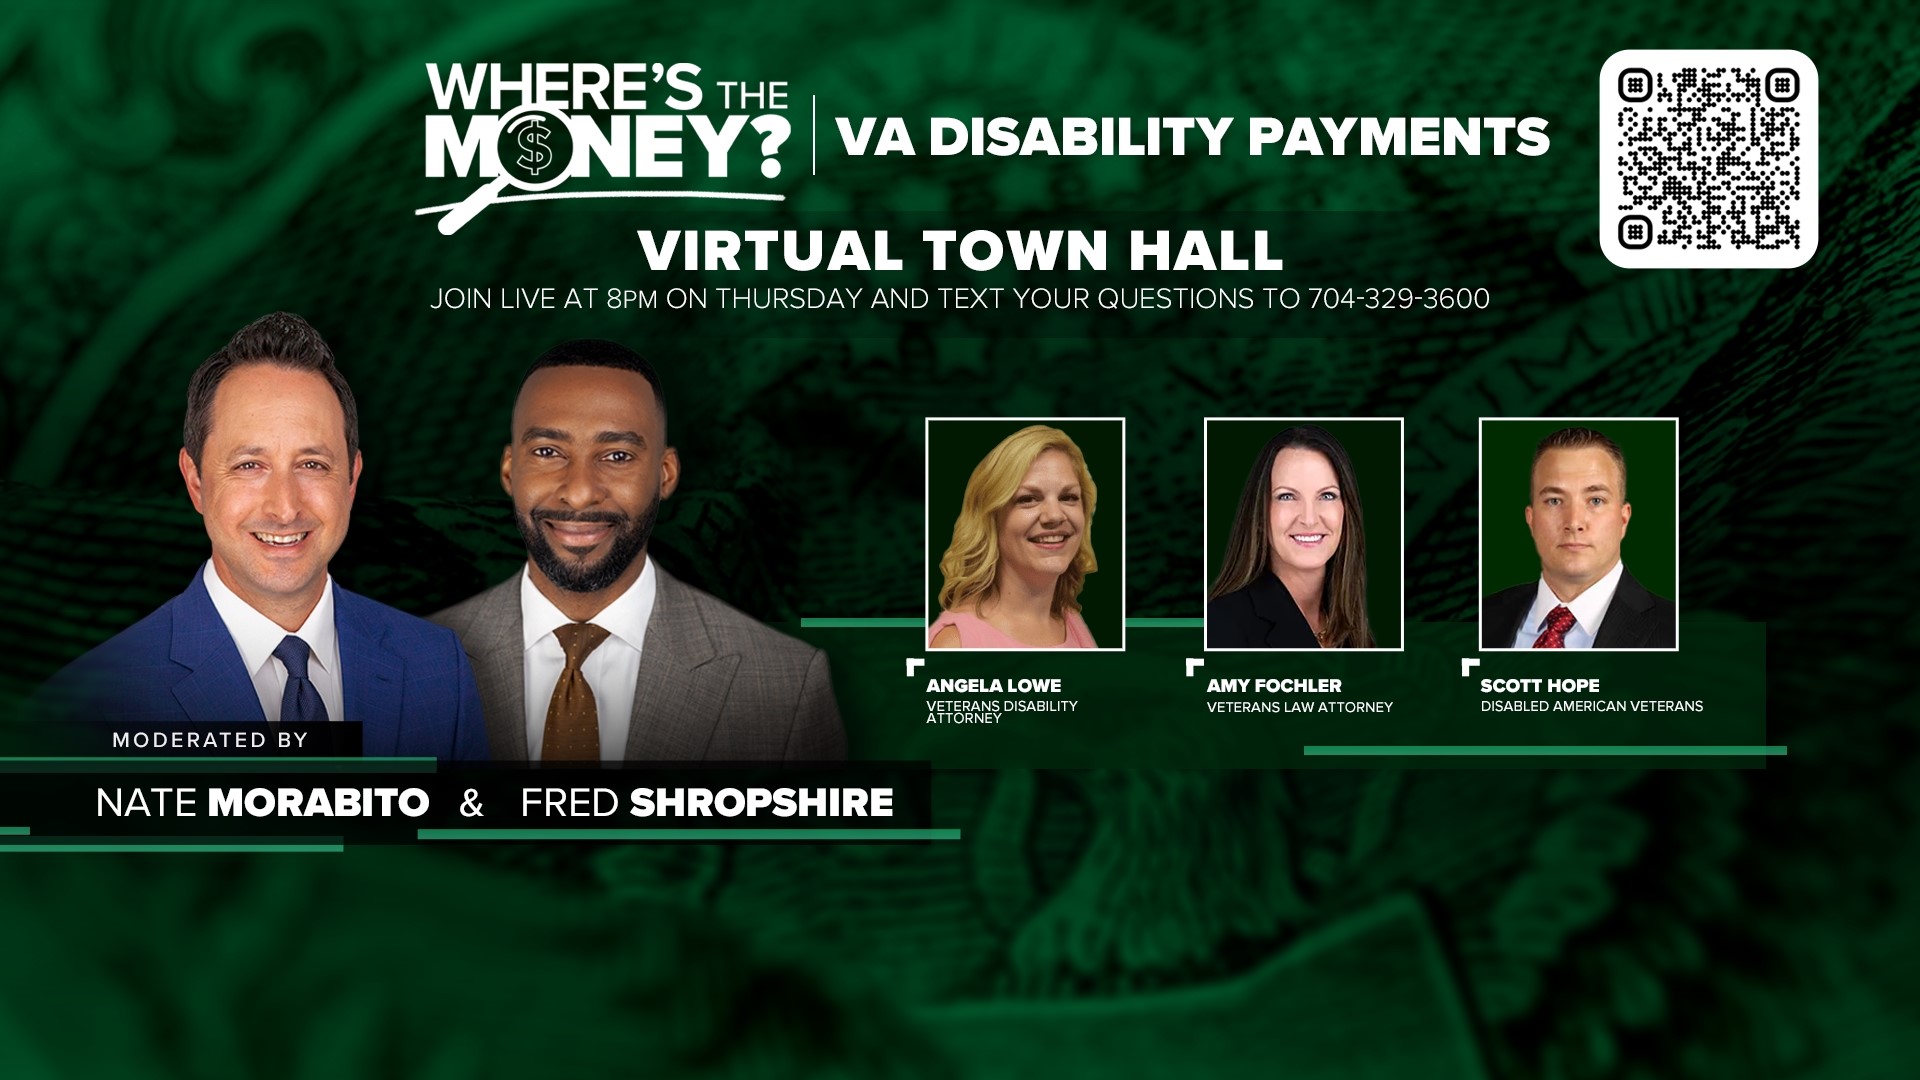 WCNC Charlotte's Nate Morabito and Fred Shropshire are joined by veteran disability experts to talk about disability payment issues facing veterans.